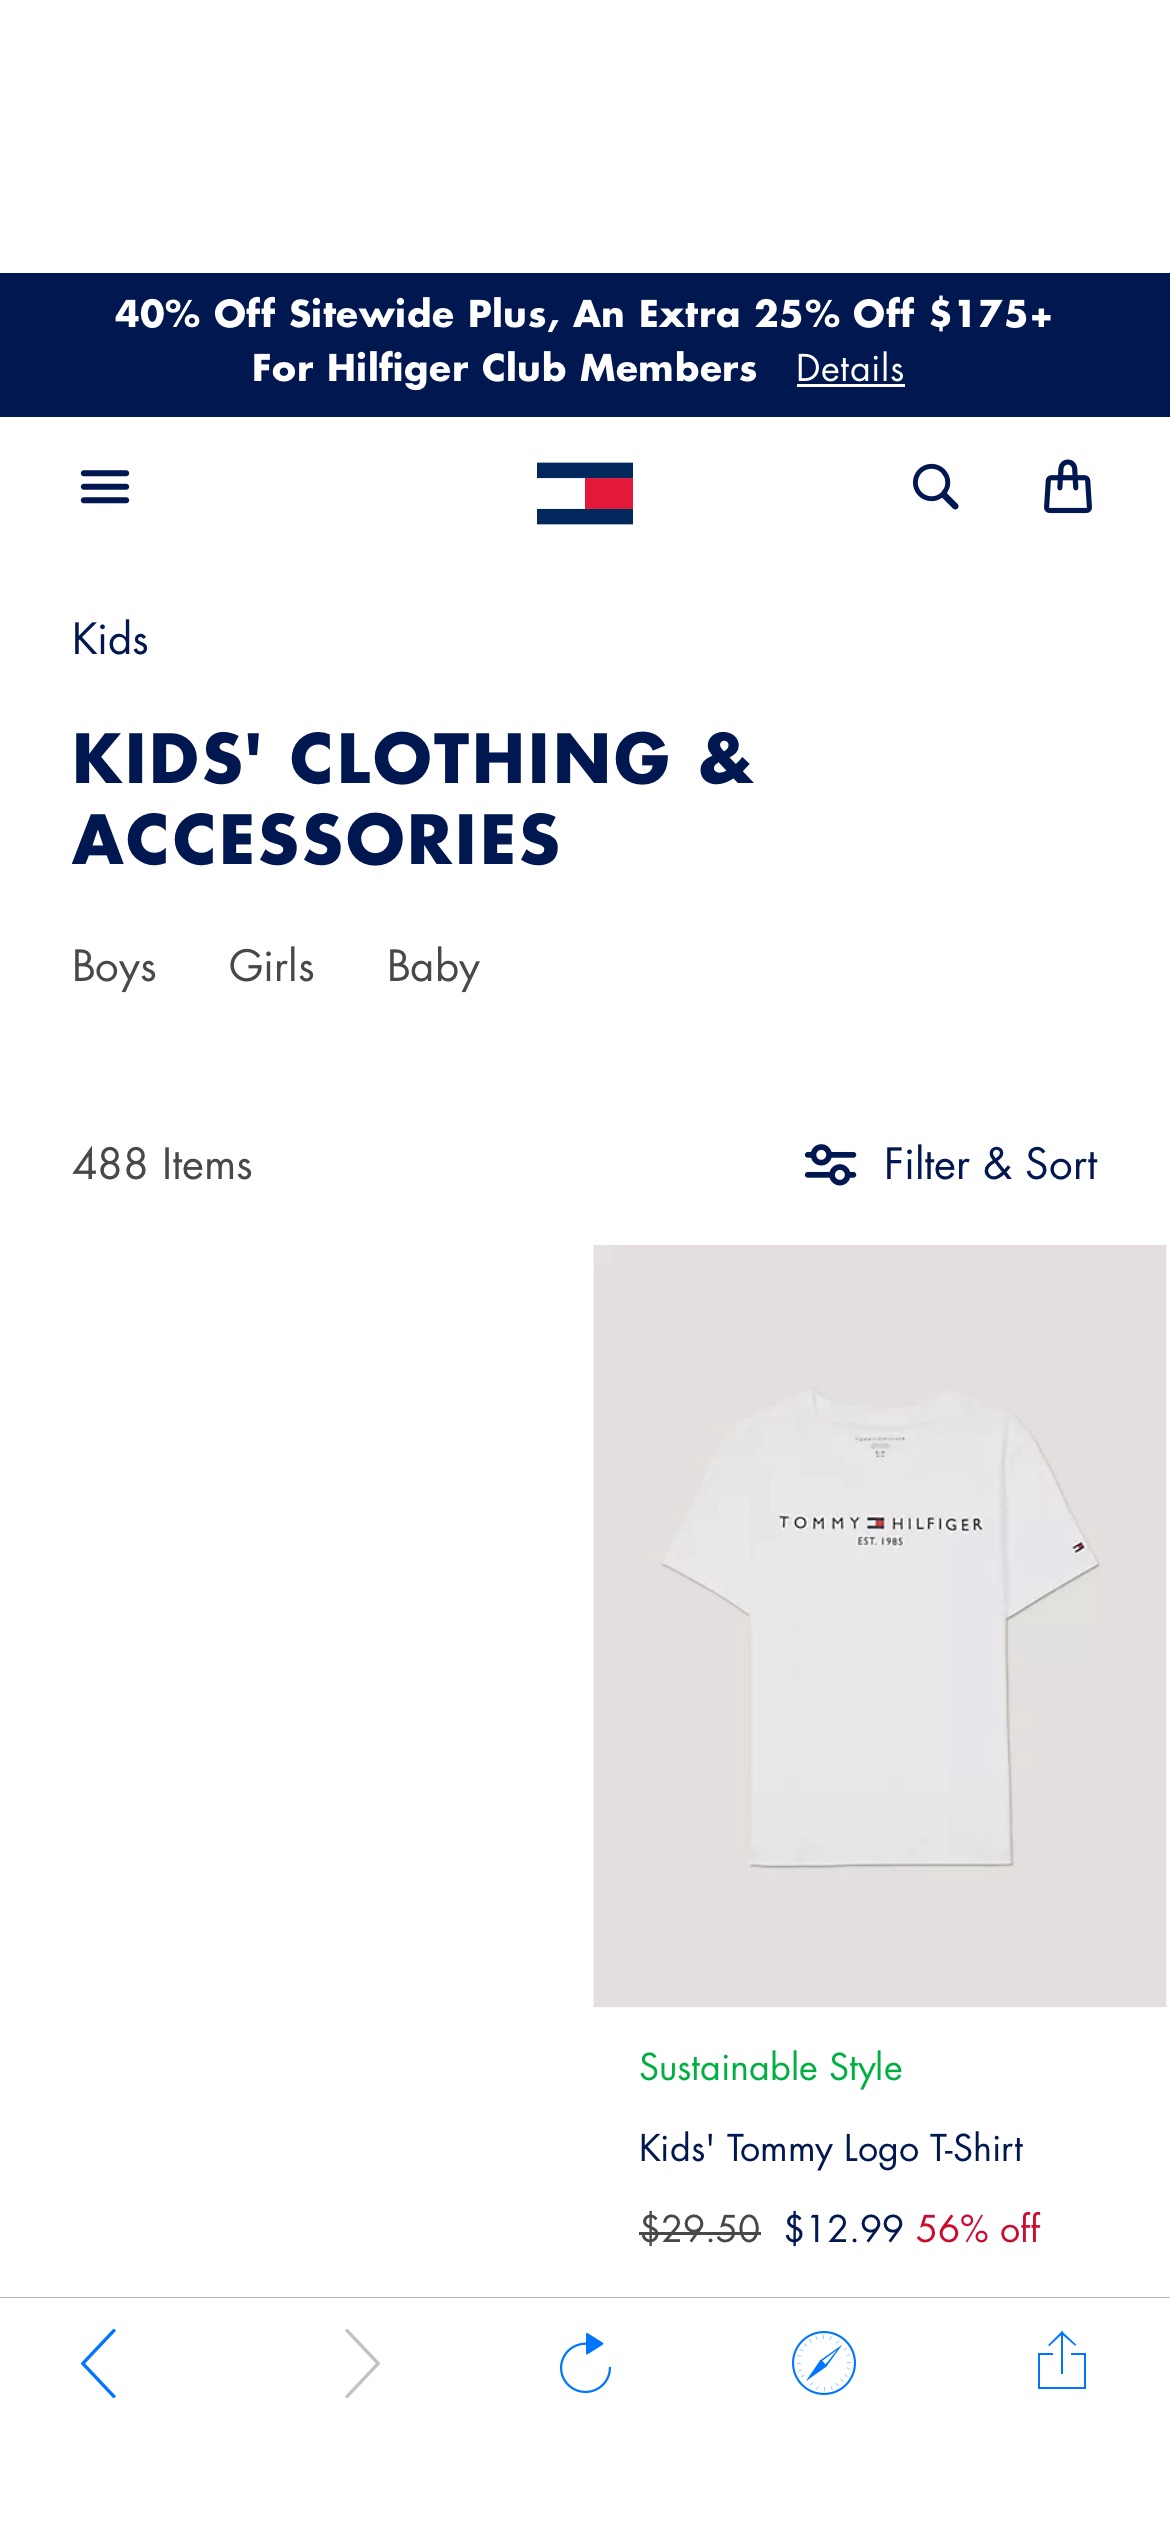 Baby & Kids Clothing & Accessories | Shop Online | Tommy Hilfiger USA Tommy Hilfiger USA | Official Online Site and Store亲友大促，童装低至6折+满$175额外7.5折